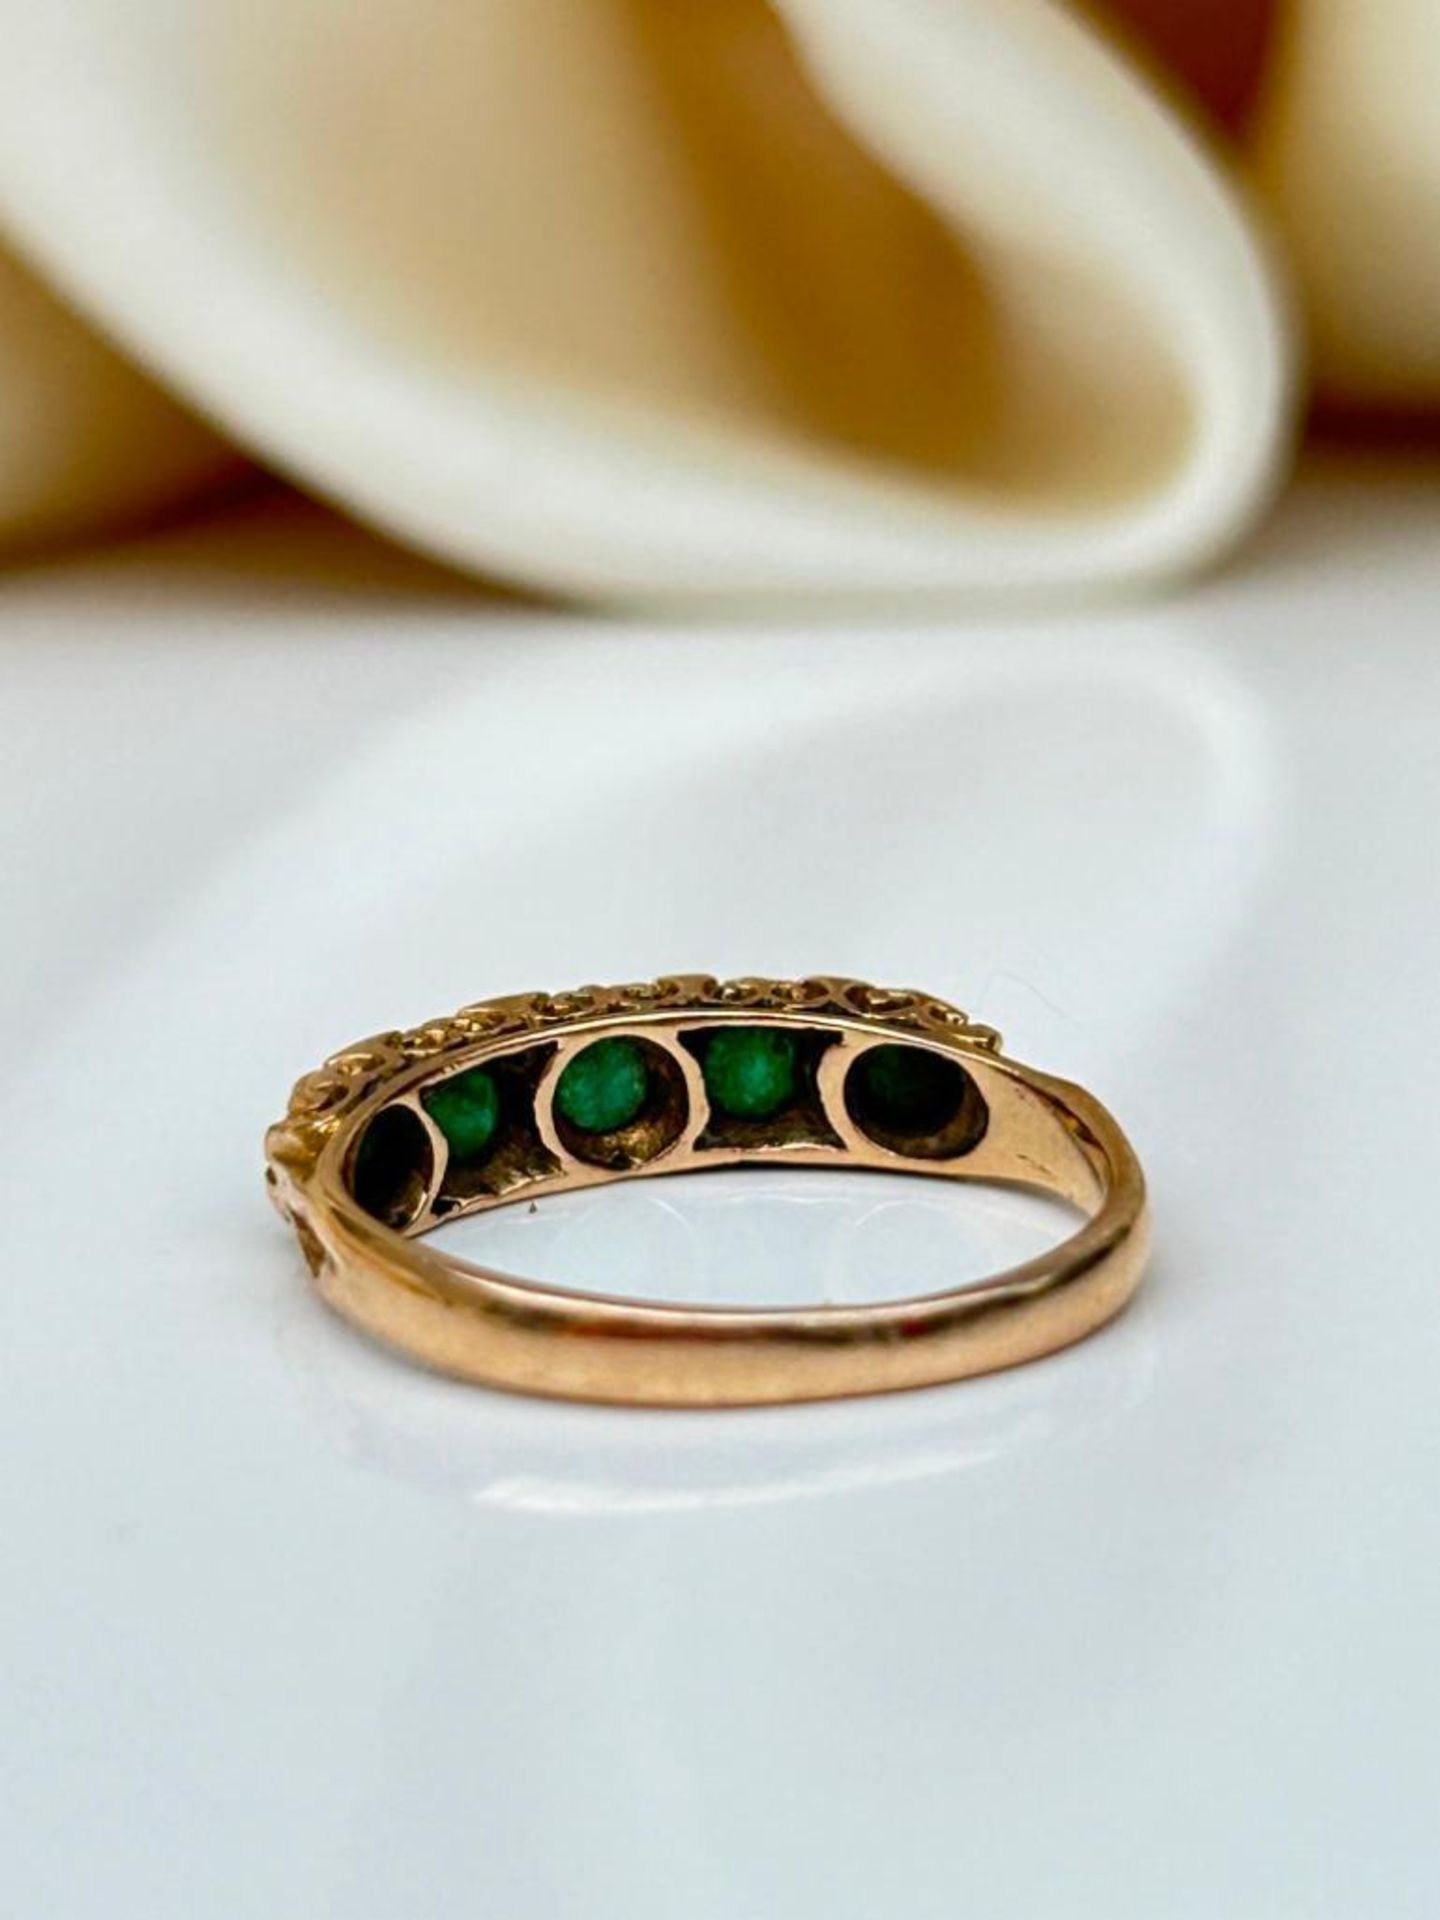 18ct Yellow Gold Emerald 5 Stone Ring with Diamond Points - Image 8 of 8